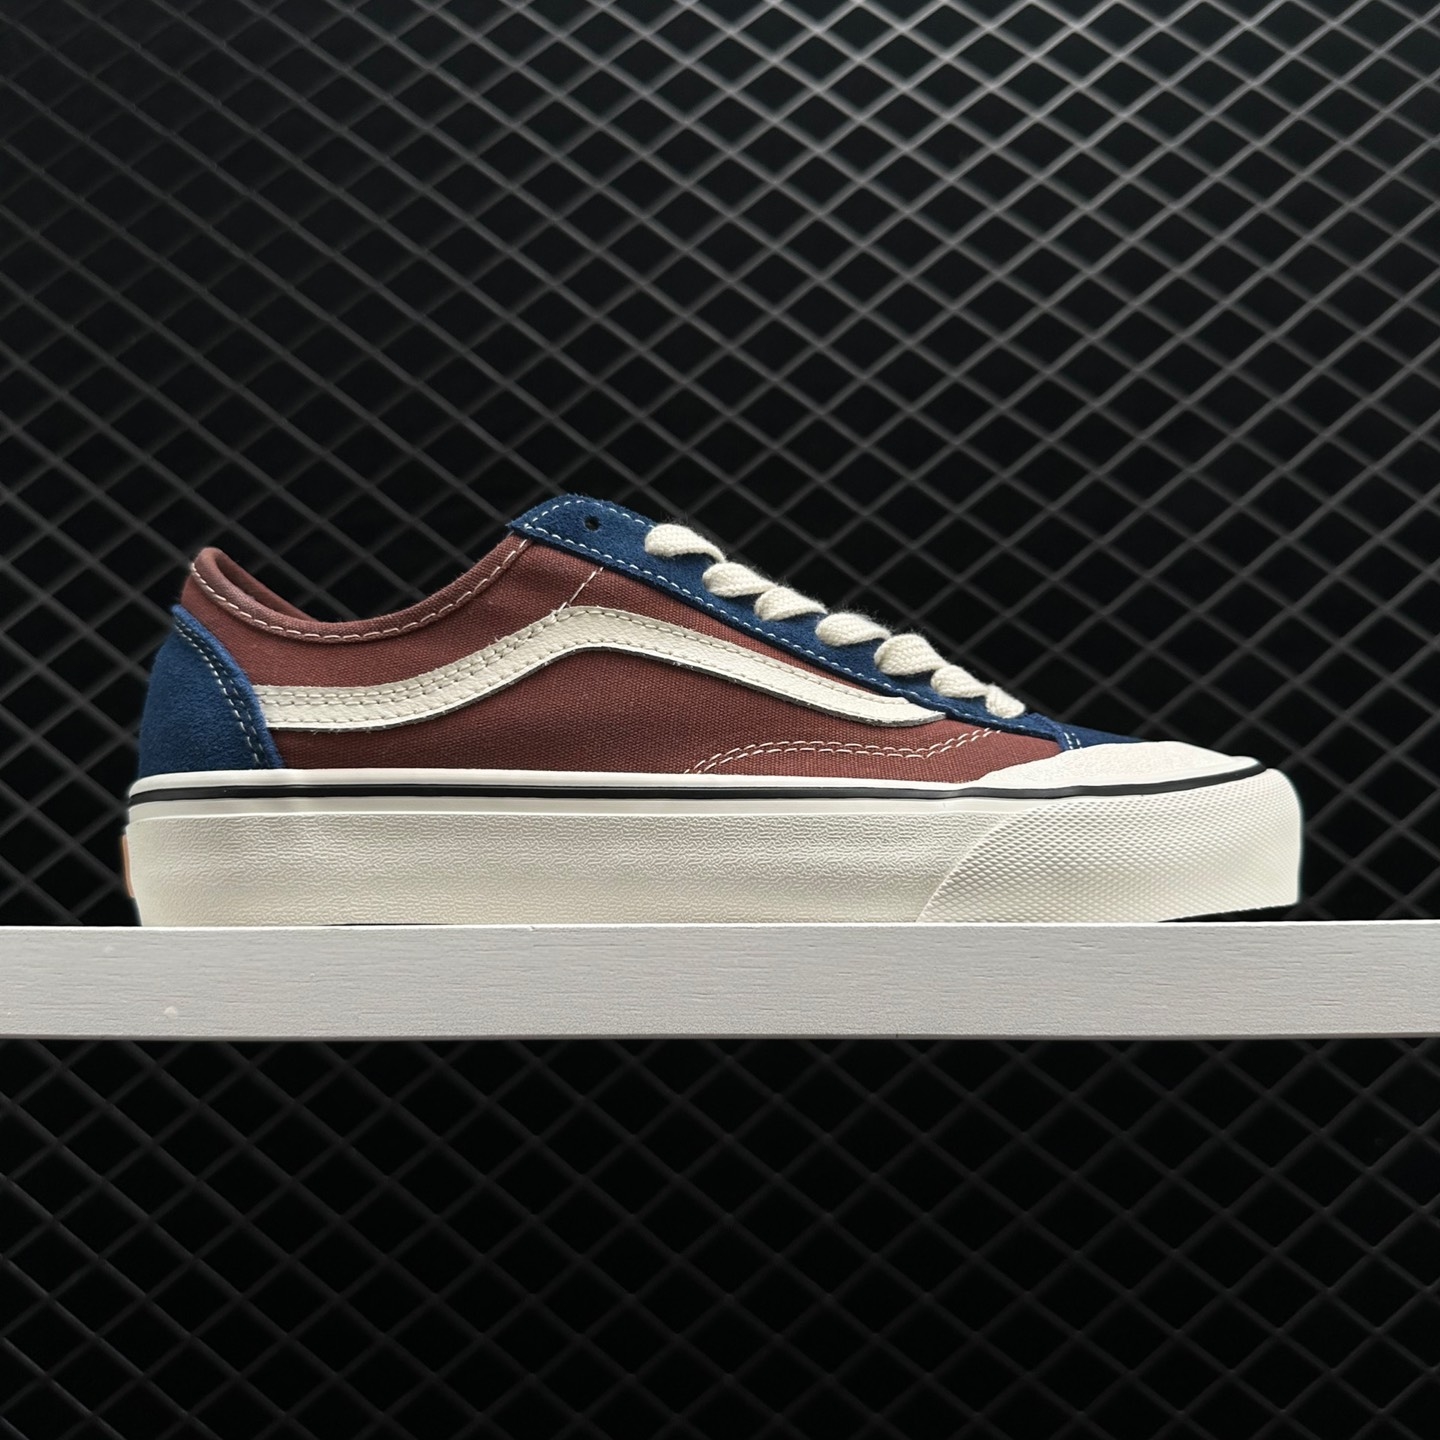 Vans Style 136 'White Red Blue' Shoes - Limited Edition